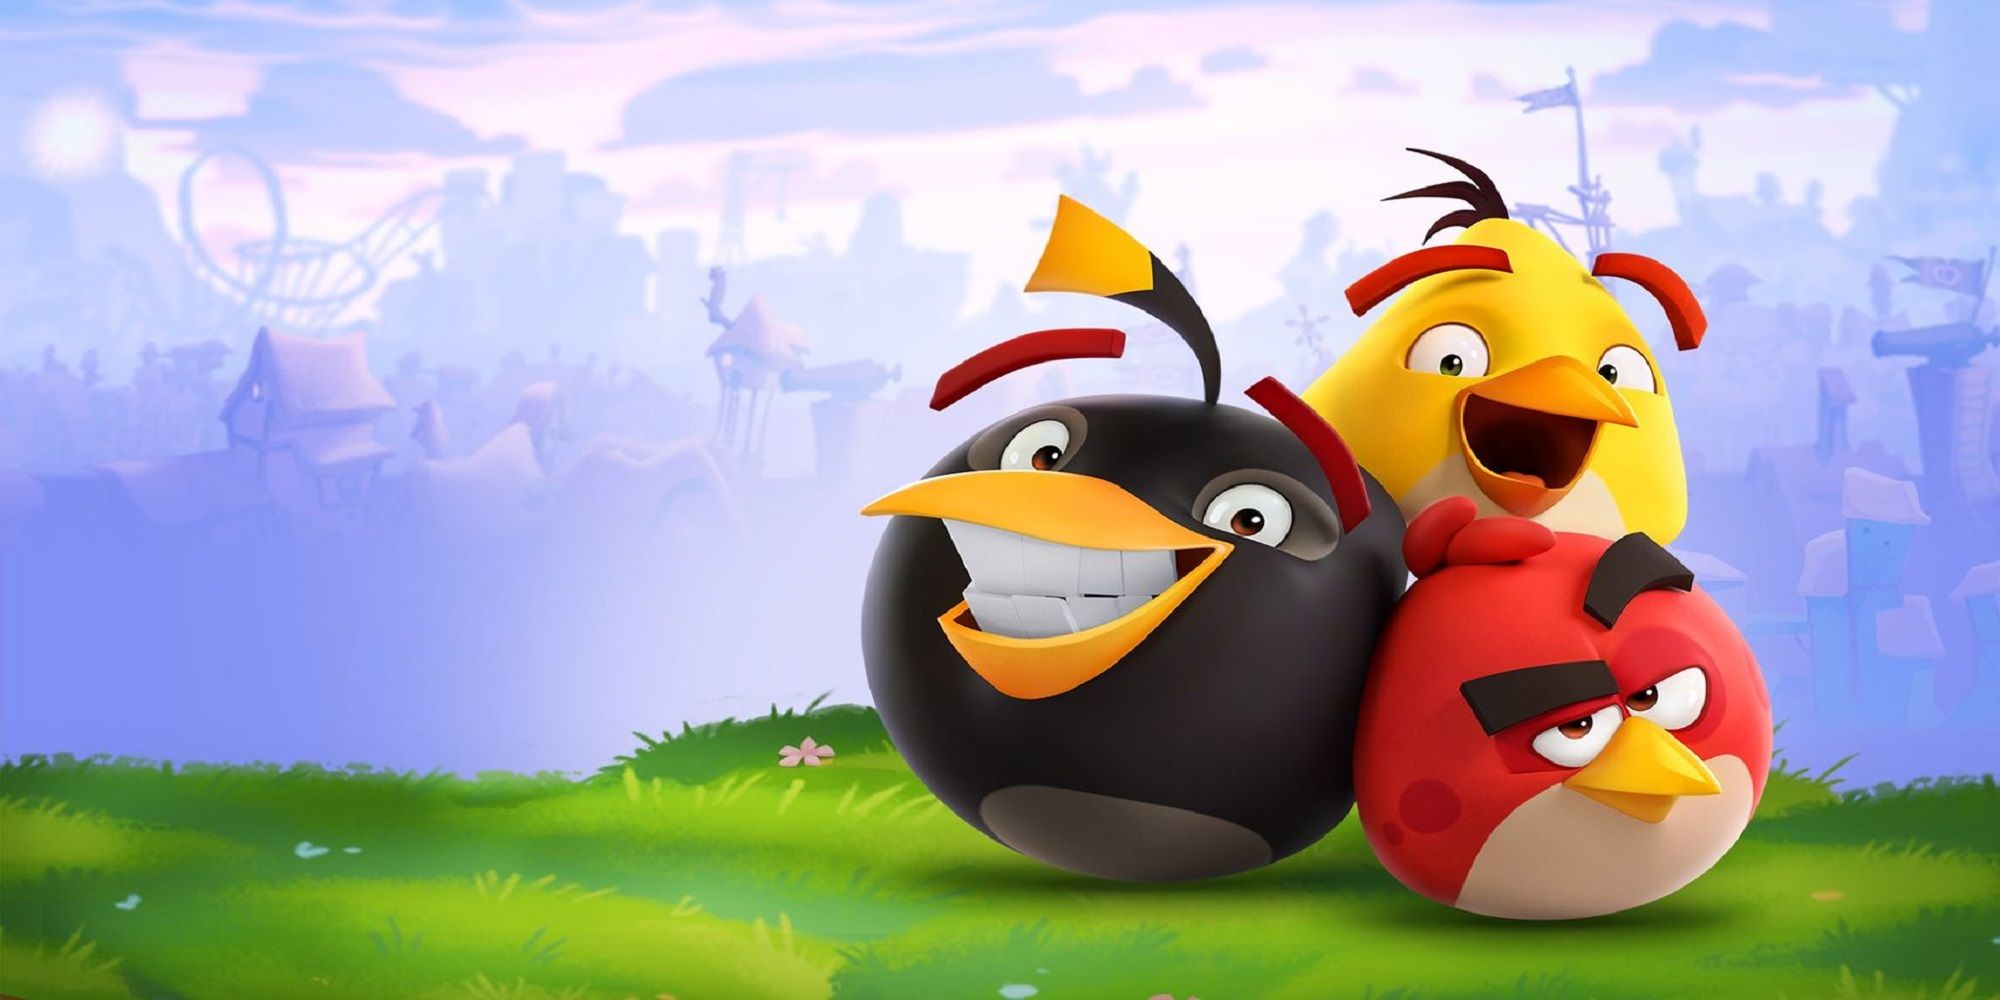 Angry Birds is being delisted on Android devices